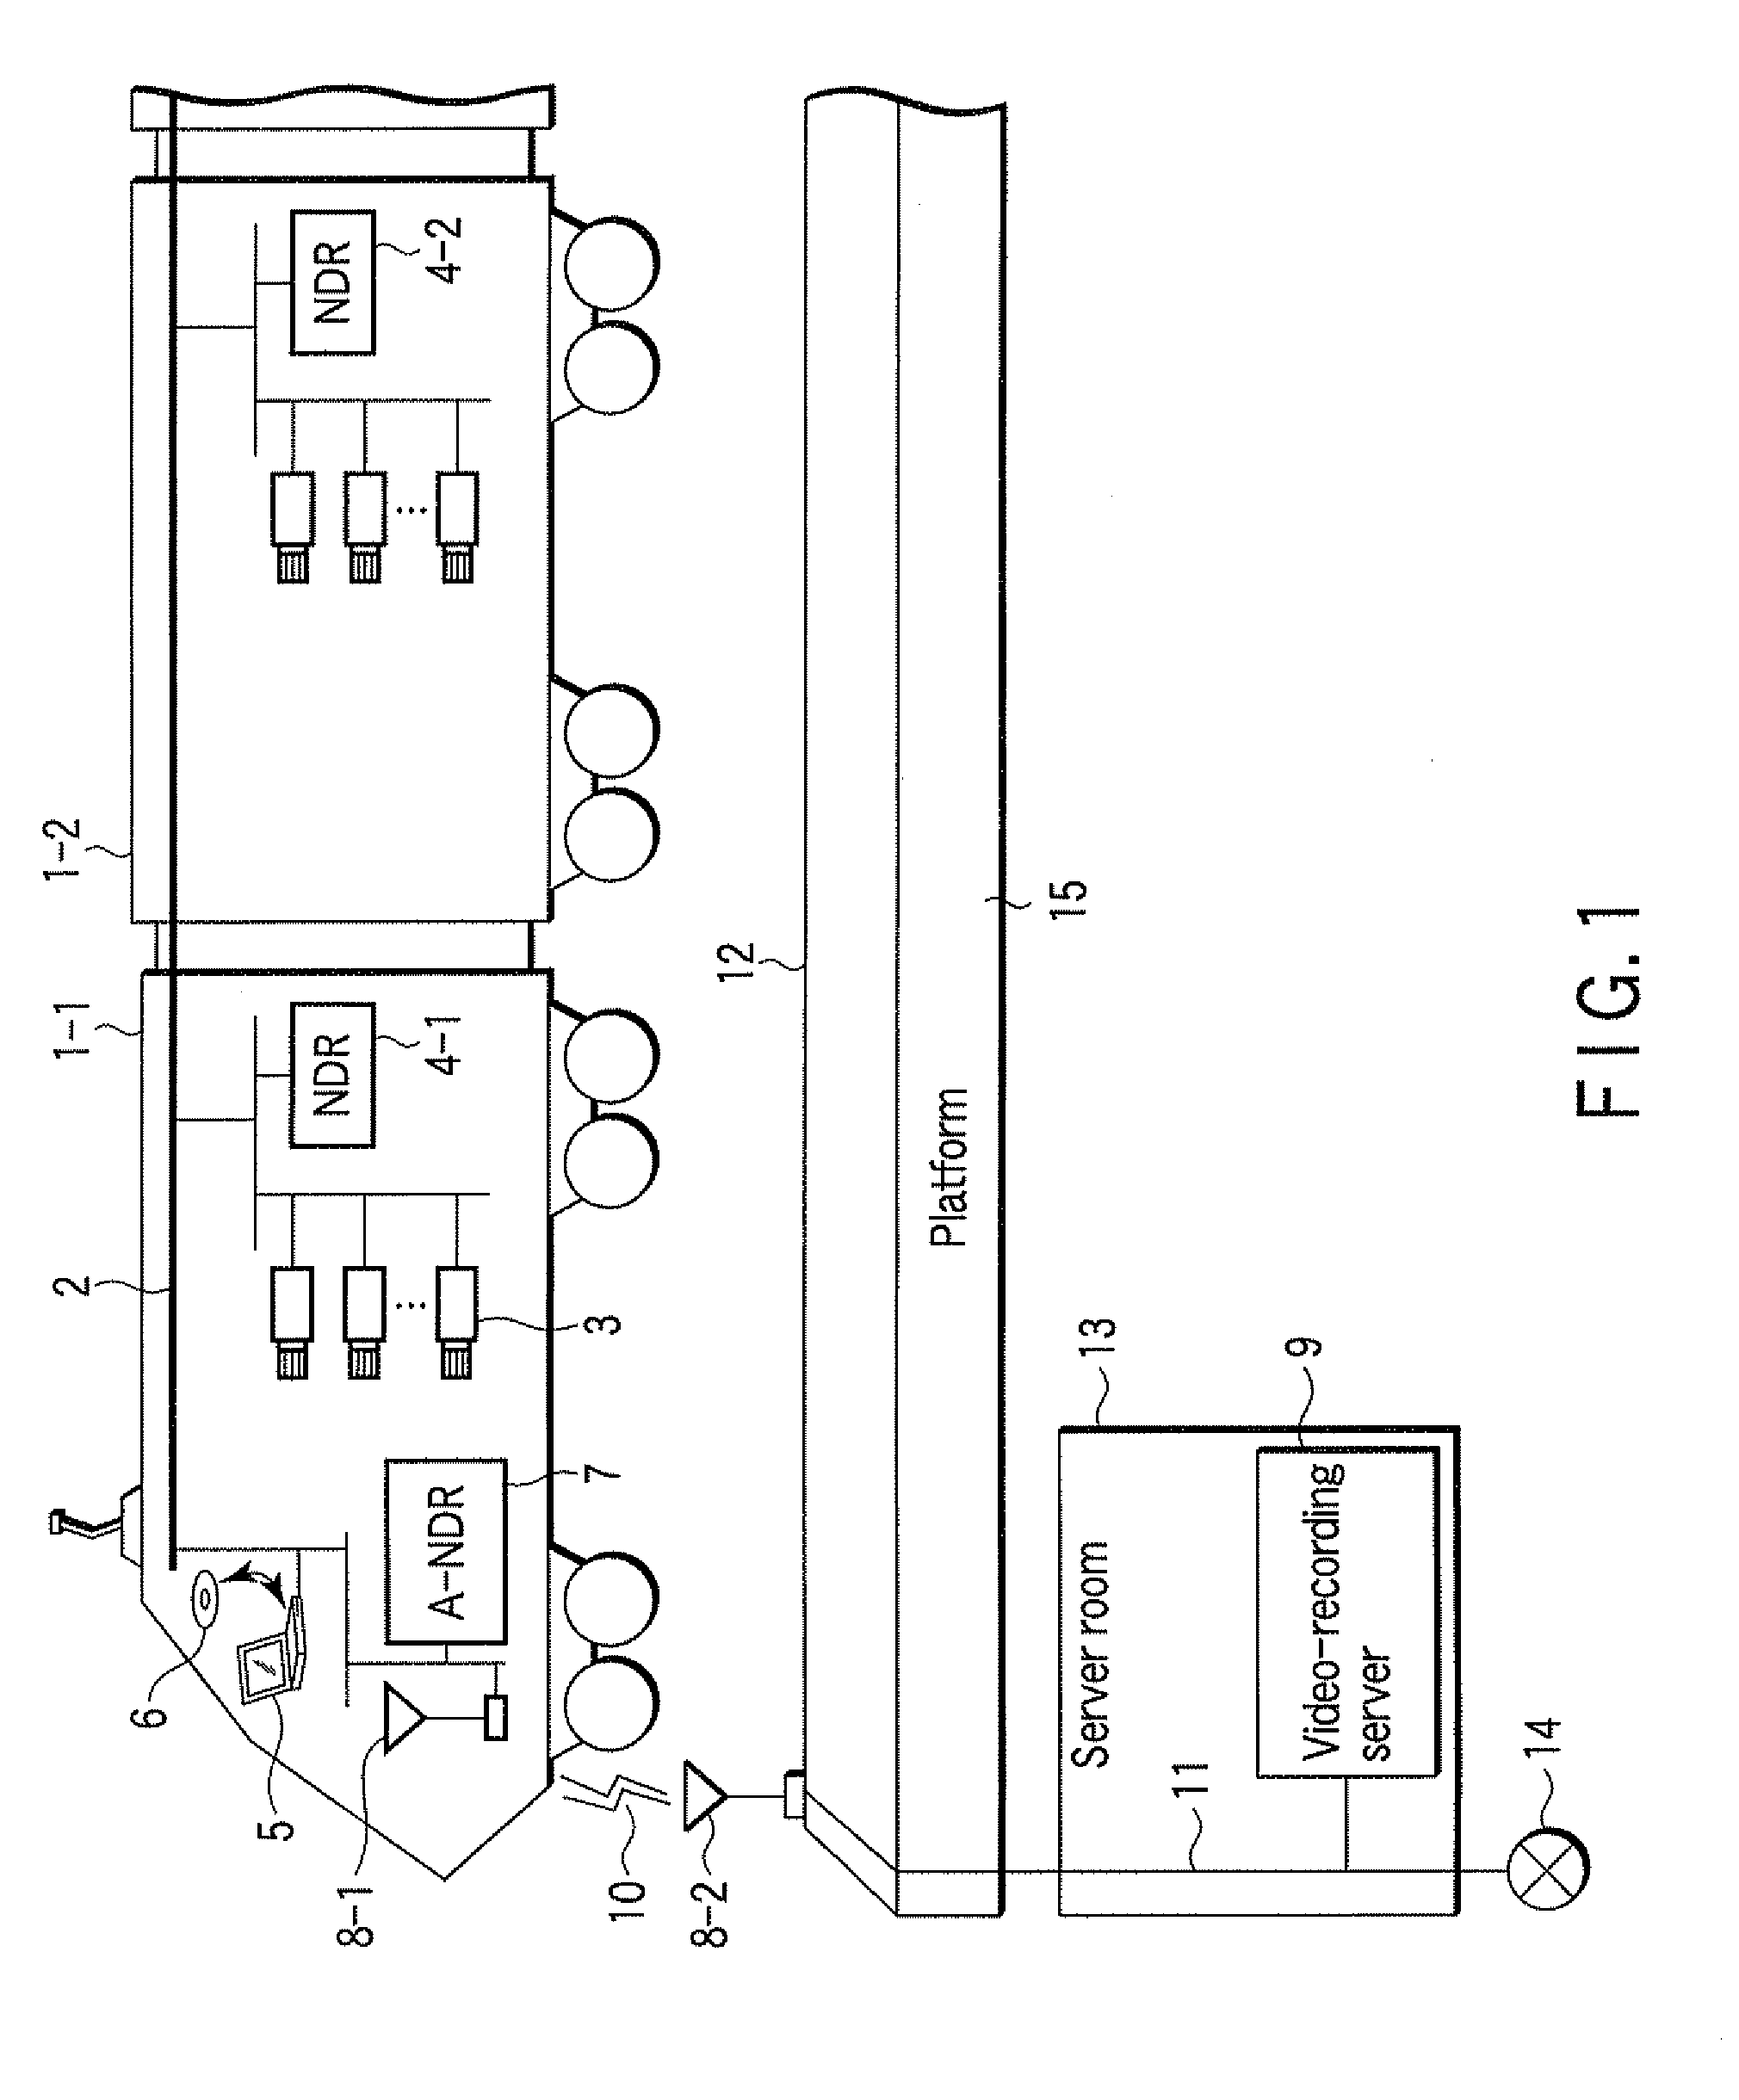 Video-recording and transfer apparatus, and video-recording and transfer method